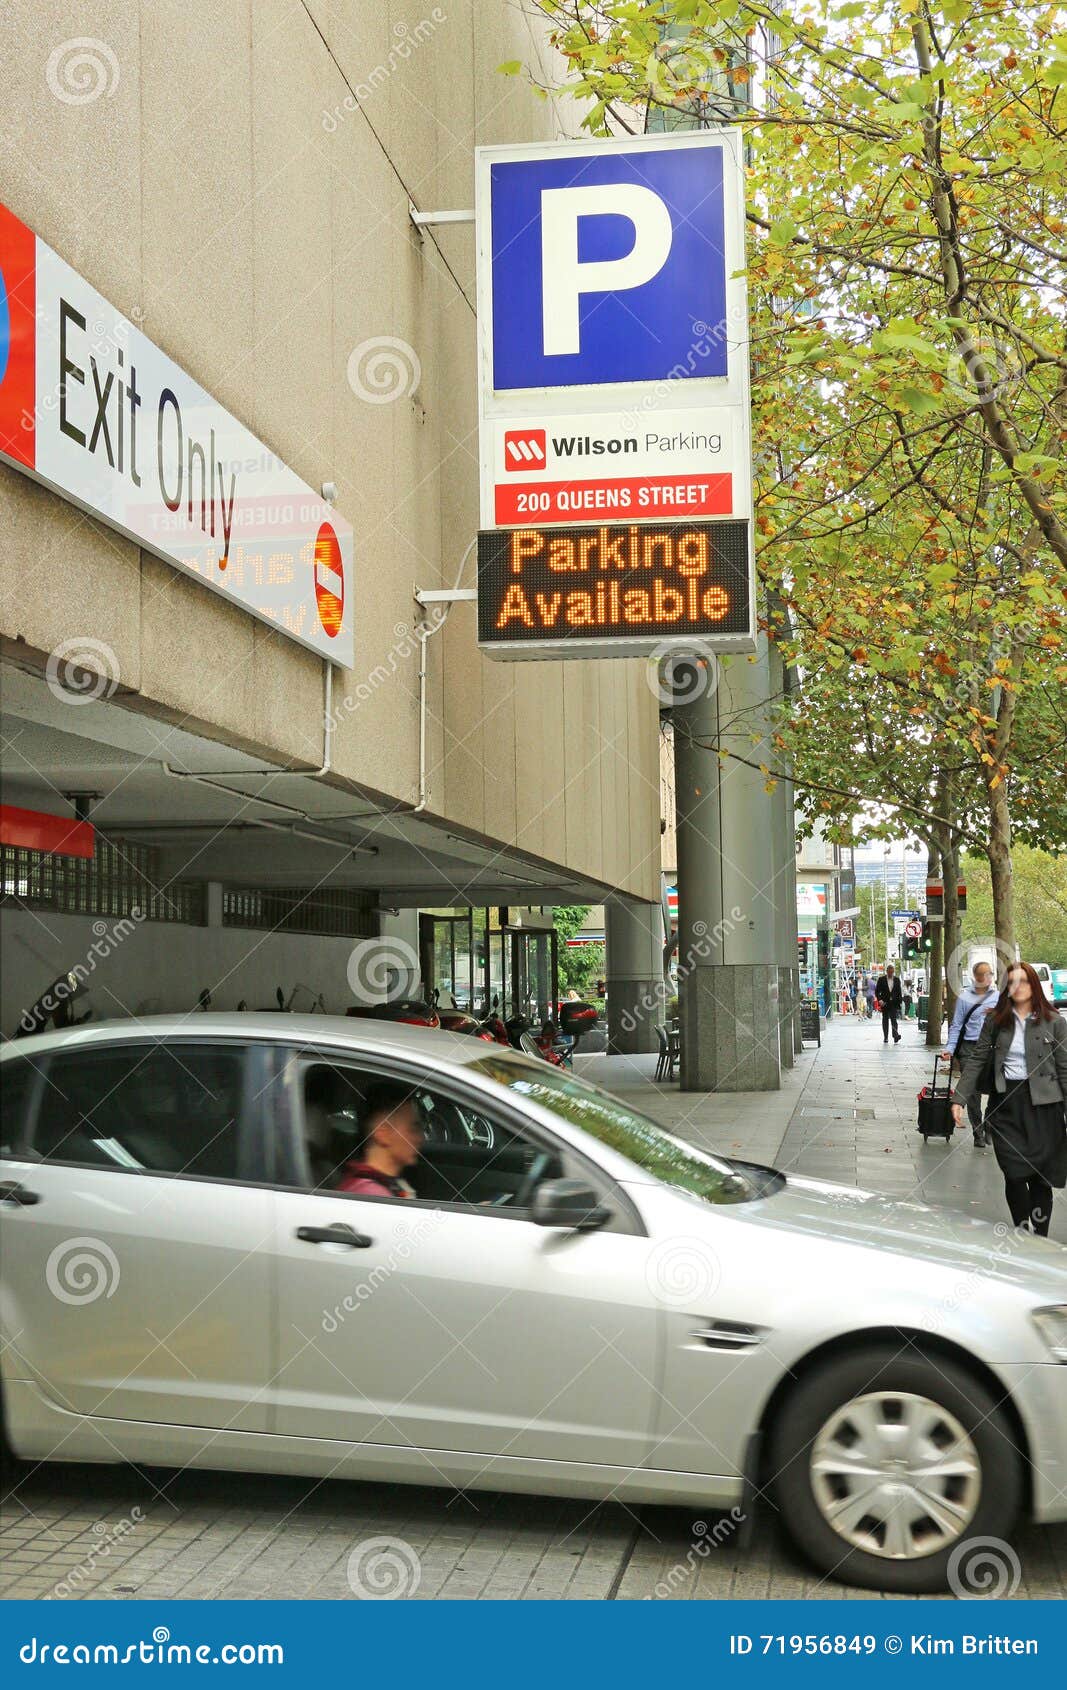 Wilson Parking S Queen Street Facility Offers Secure 24 Hour Car